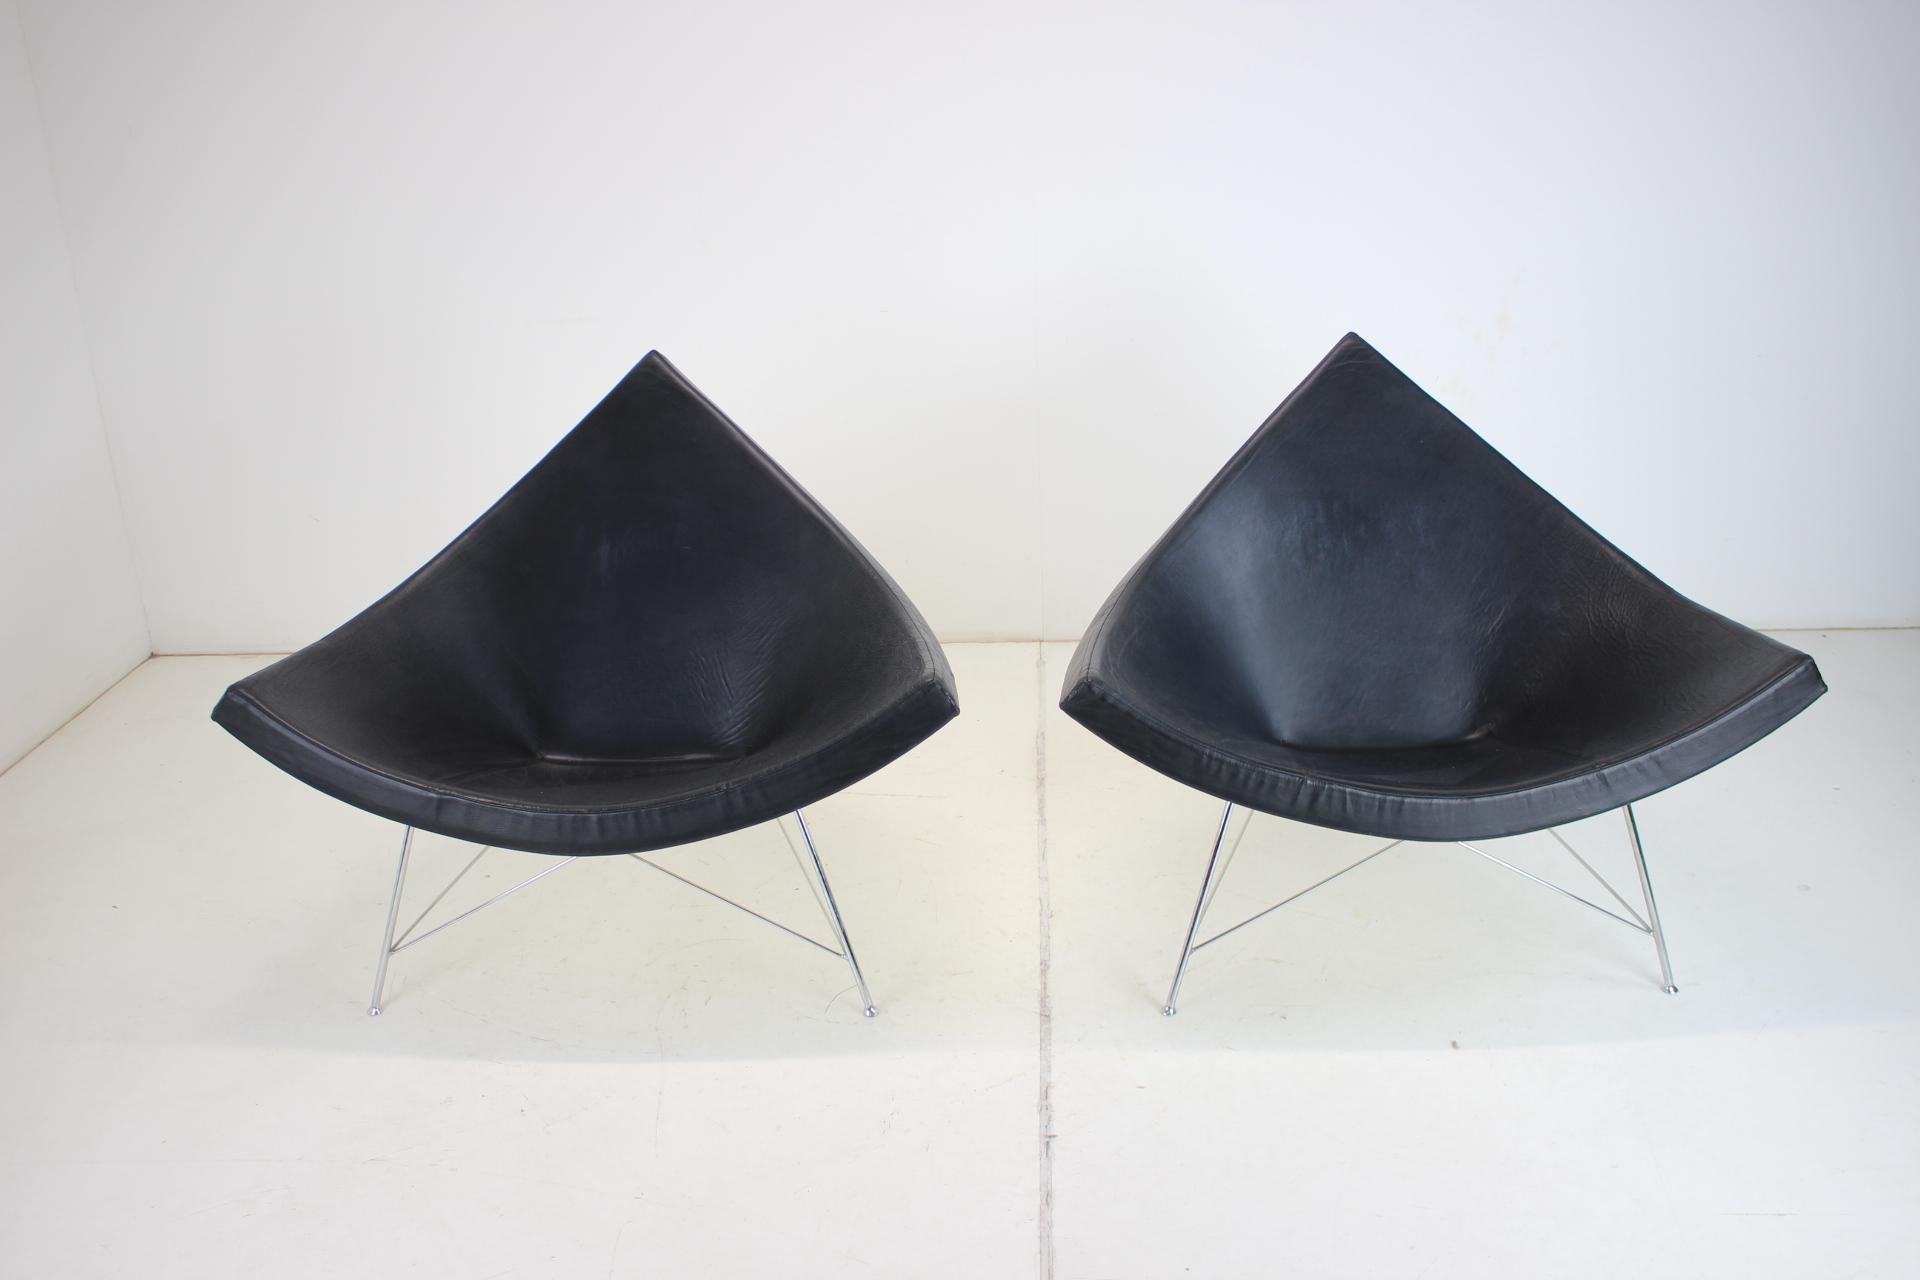 Coconut lounge chair designed by George Nelson for Herman Miller, manufactured by Vitra. Black leather, white shell and chrome legs, good original condition.
- Marked by original label
- Very comfortable
- Leatherette
- Has minor signs of use
-